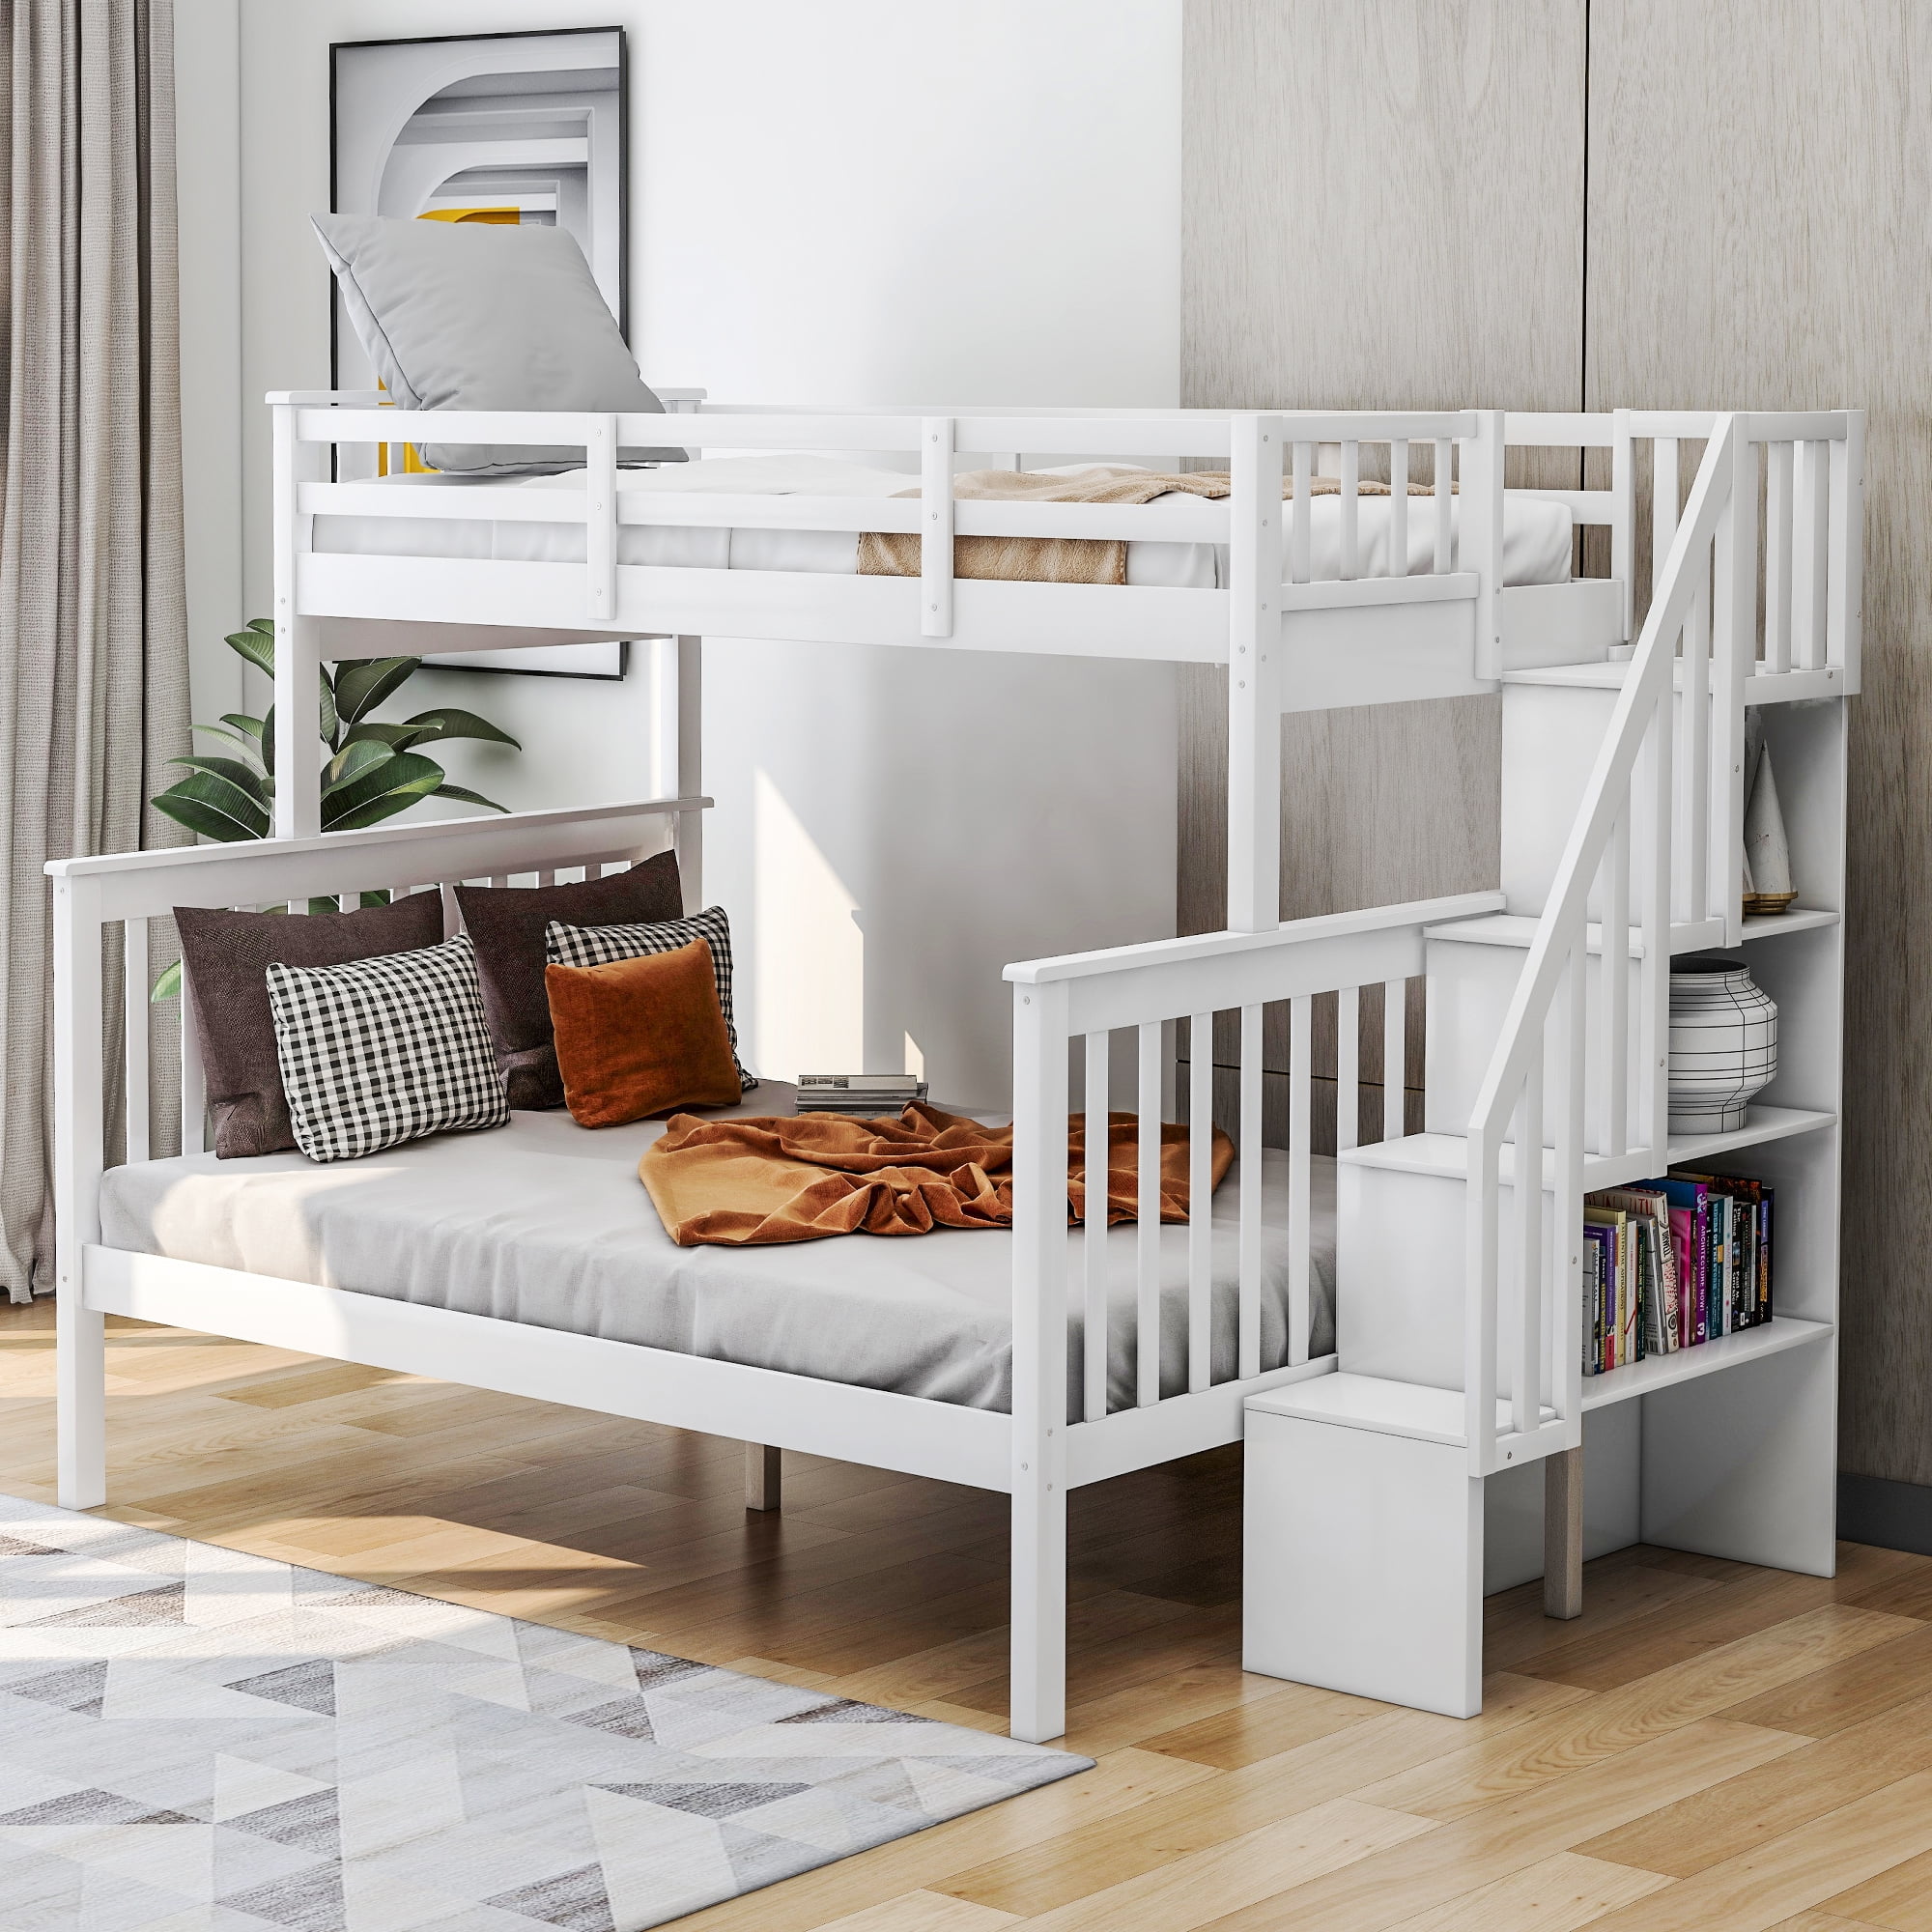 Kids Bunk Beds For Boys Girls Twin, Over The Bed Storage Shelves